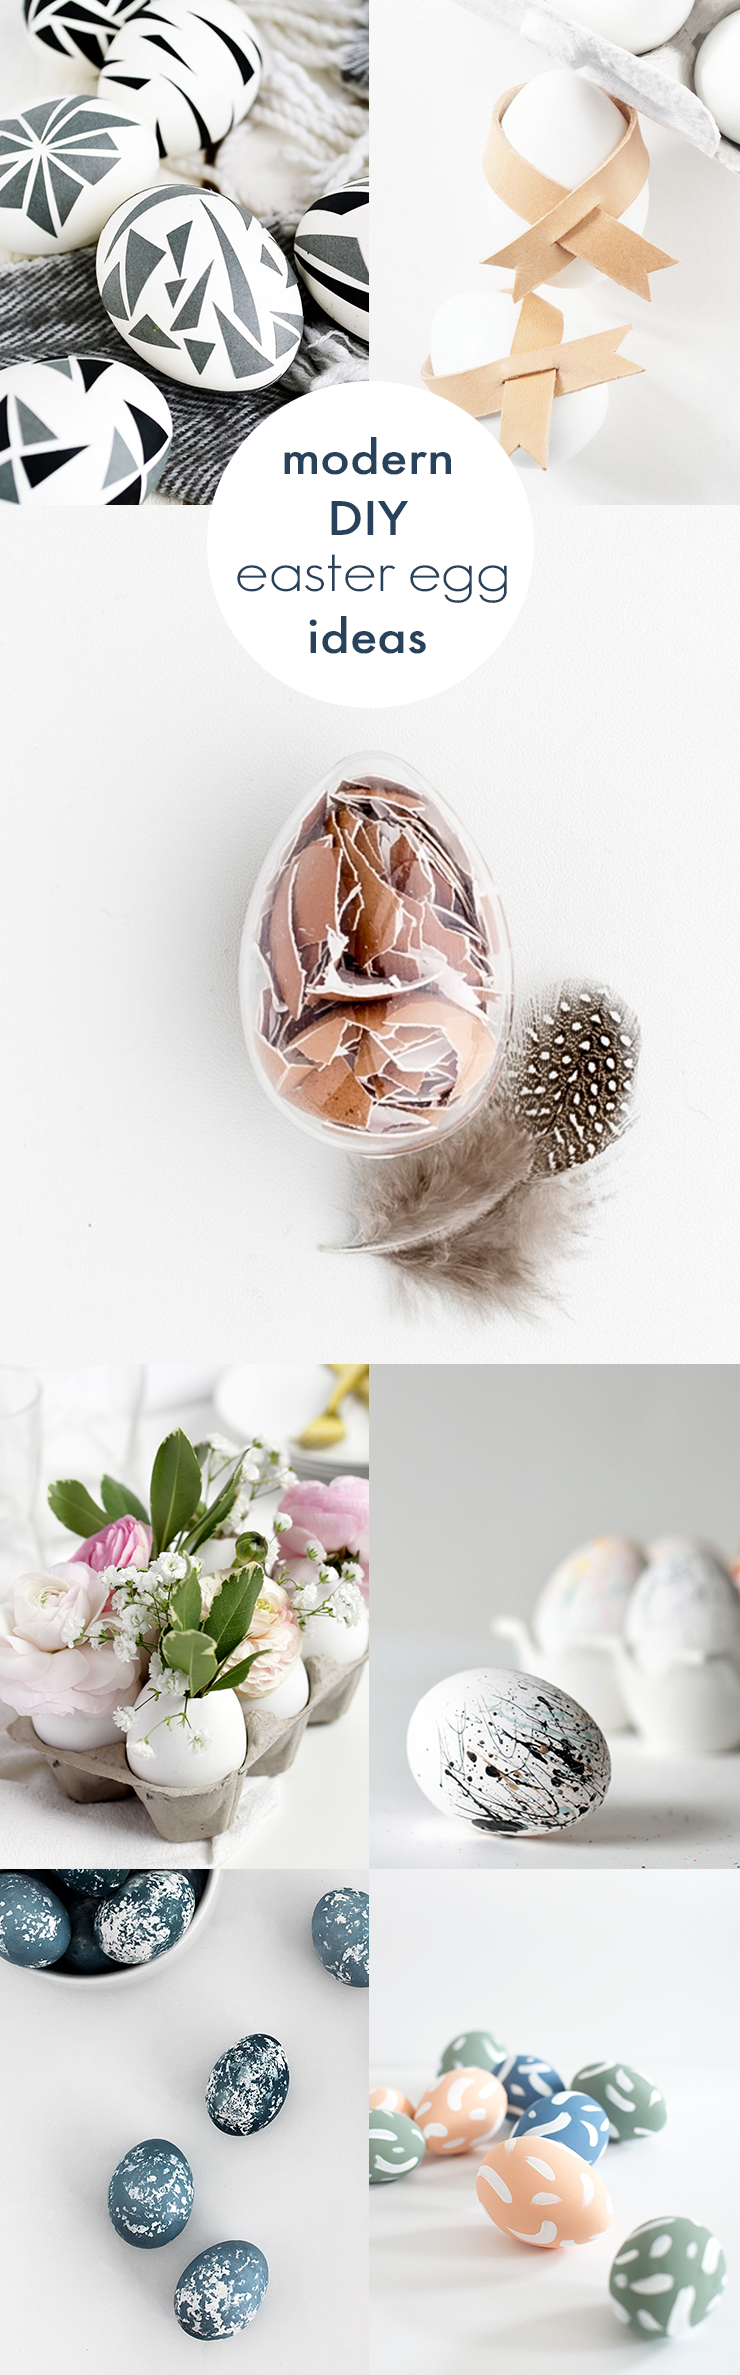 You'll love these sweet and simple modern DIY Easter egg ideas. Click through for more!